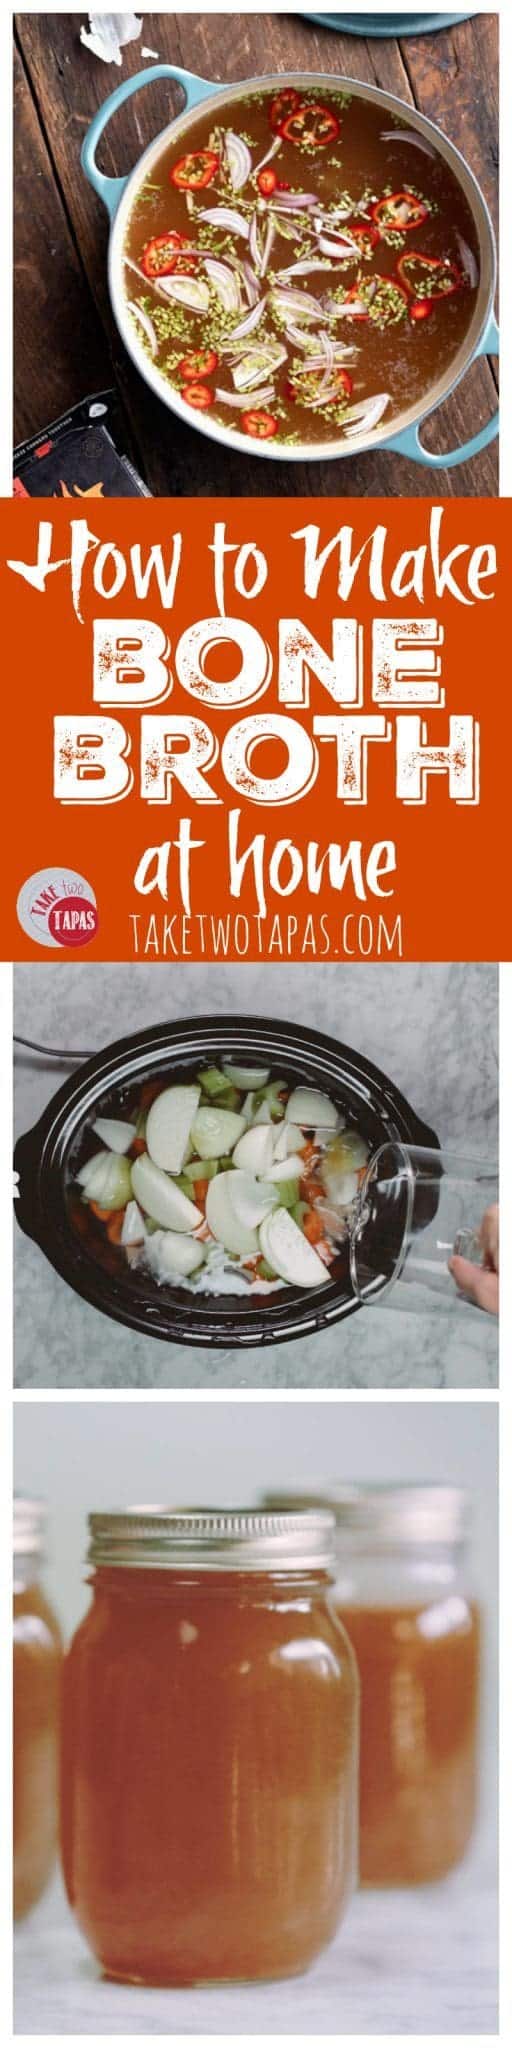 This savory beef bone broth is a simple recipe that is the perfect remedy for a winter cold or just as a light pick-me-up! Beef Bone Broth Recipe | Take Two Tapas